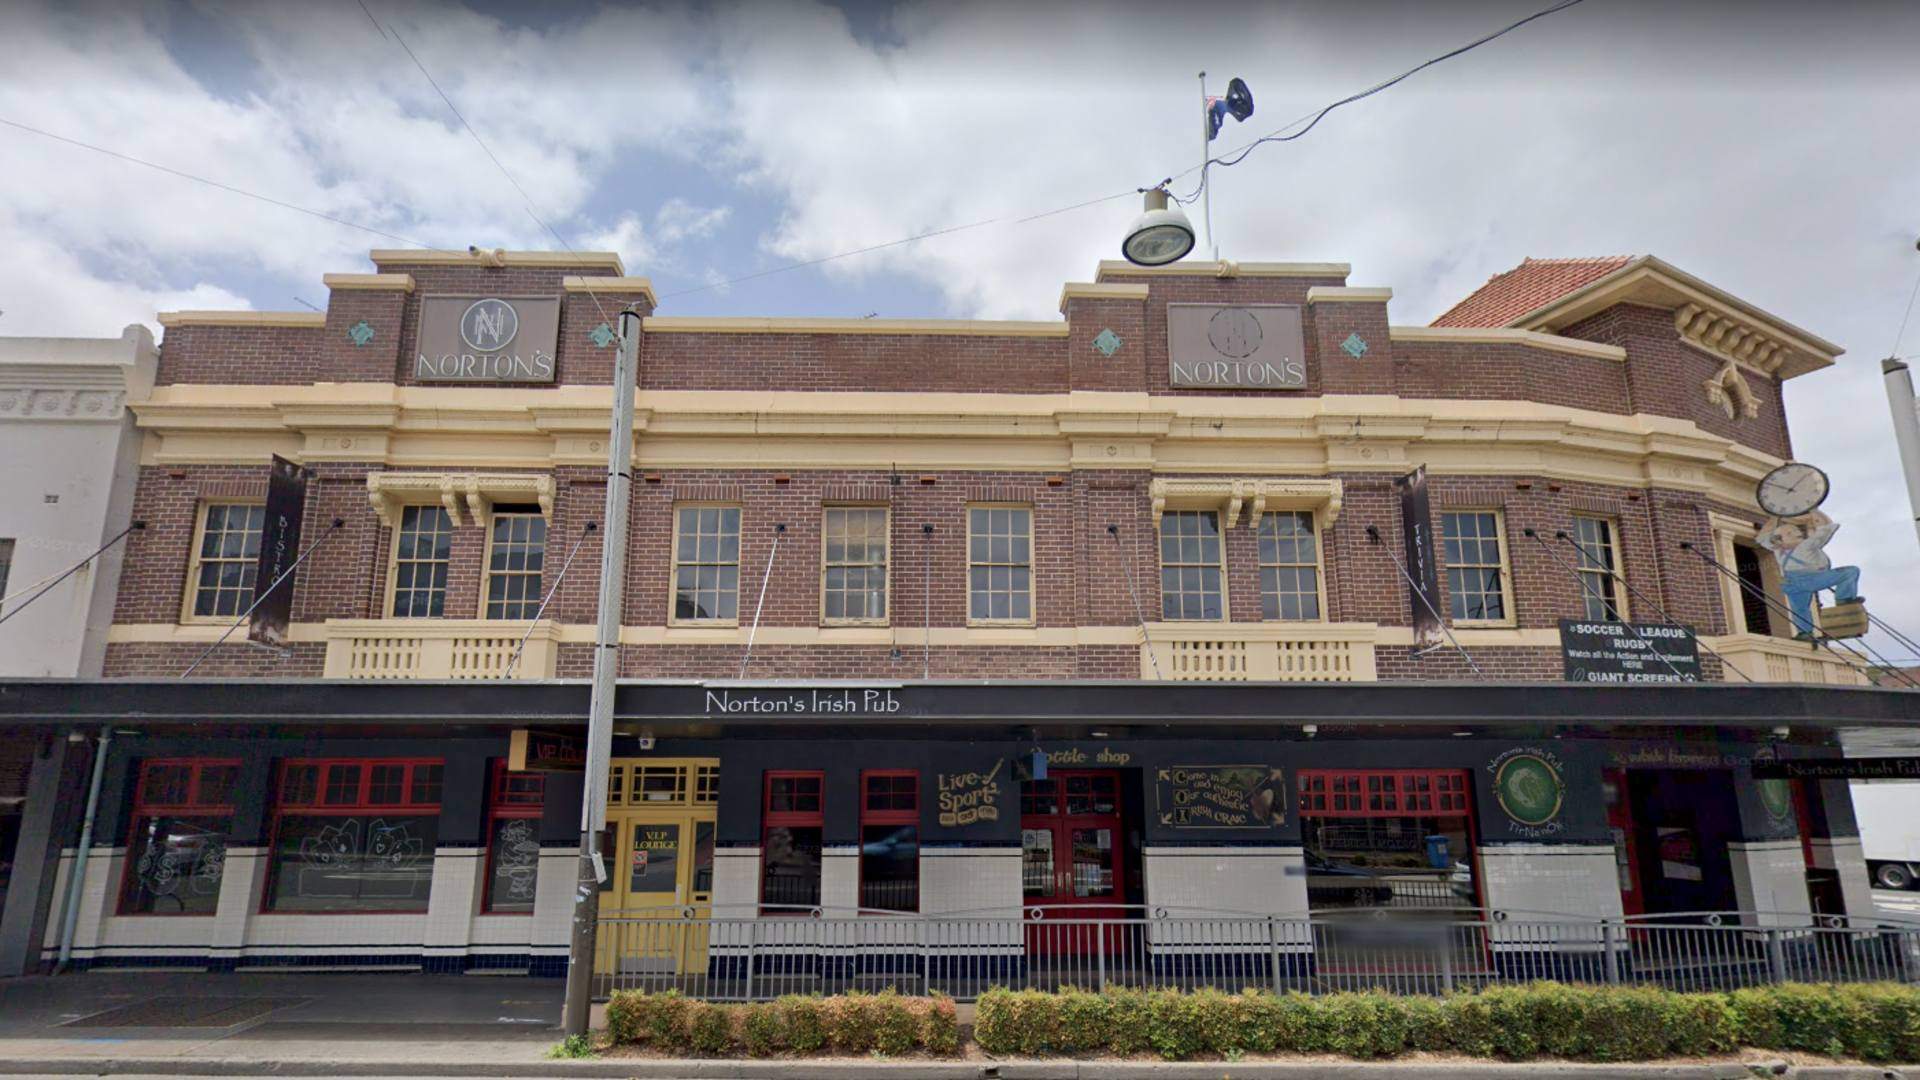 Merivale's Inner West Portfolio Has Expanded Again with the Purchase of Norton's Irish Pub